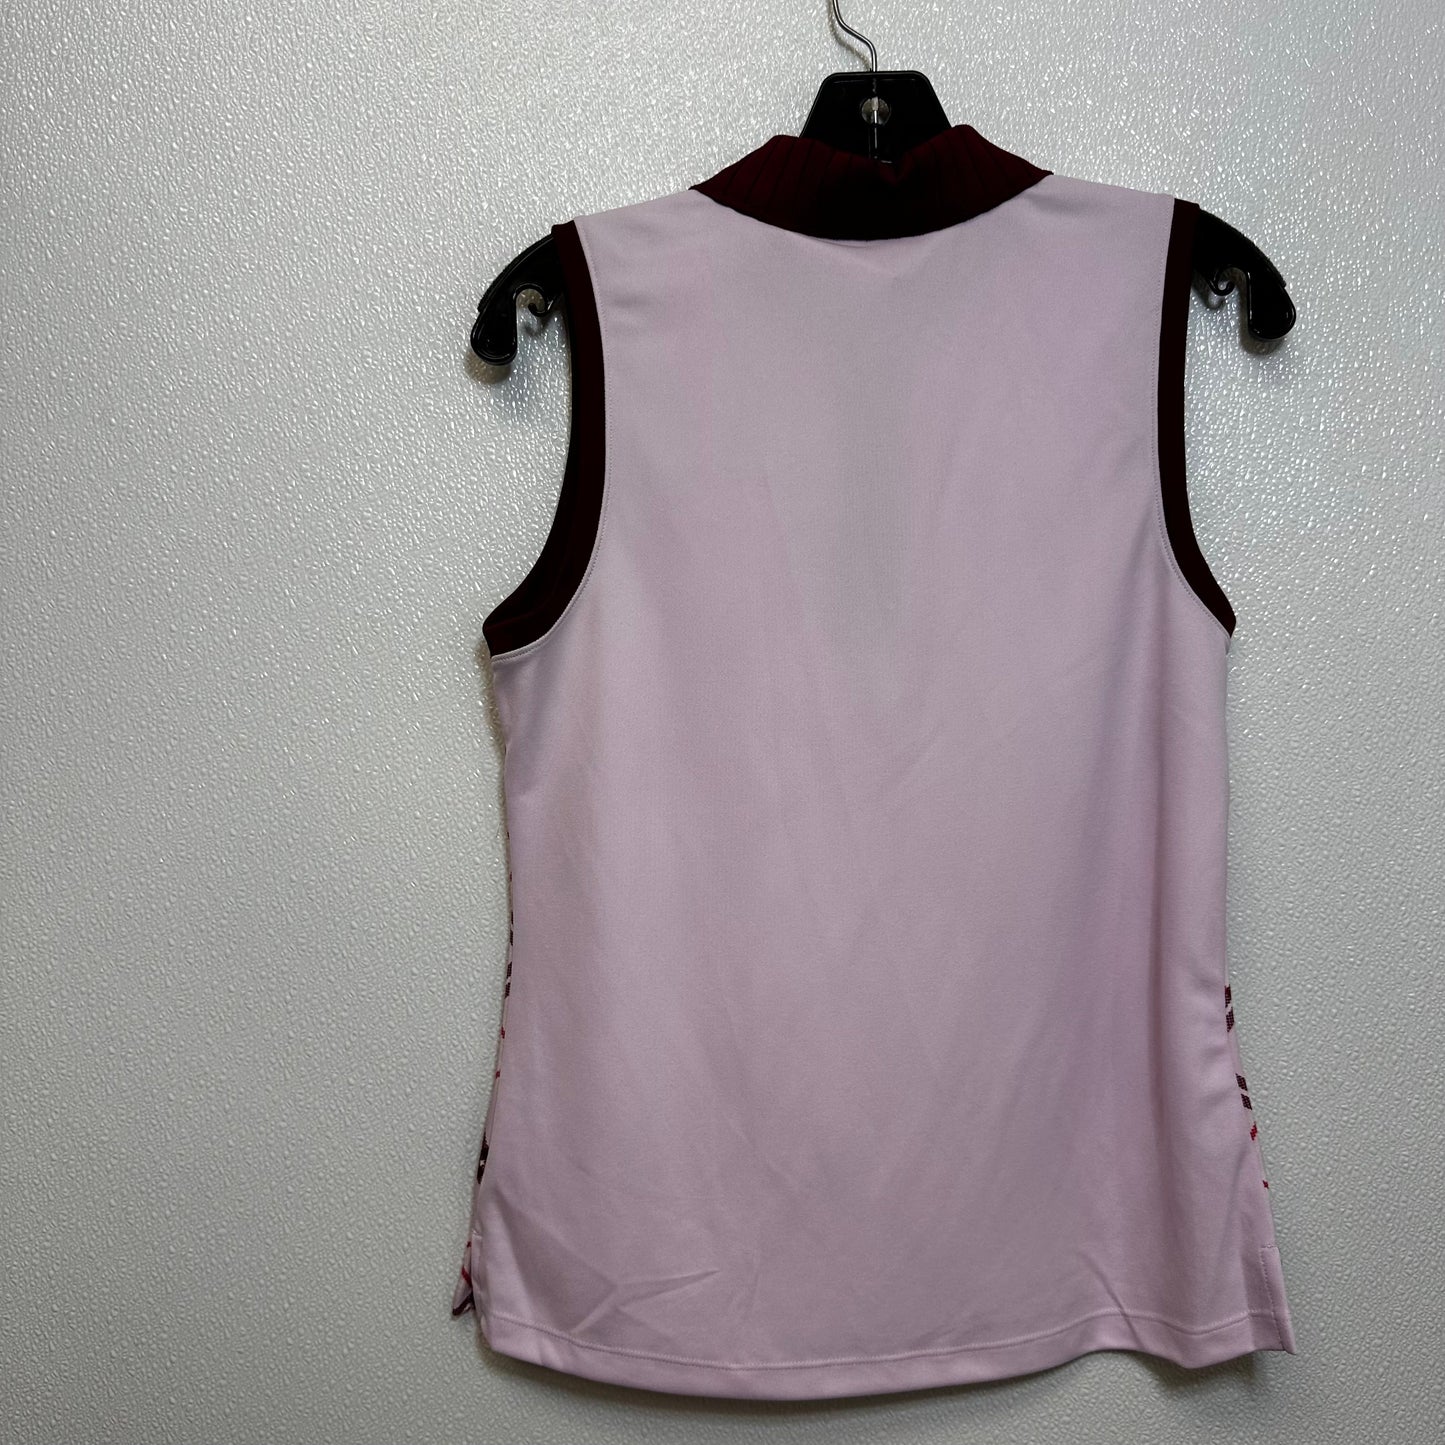 Maroon Athletic Tank Top Clothes Mentor, Size S